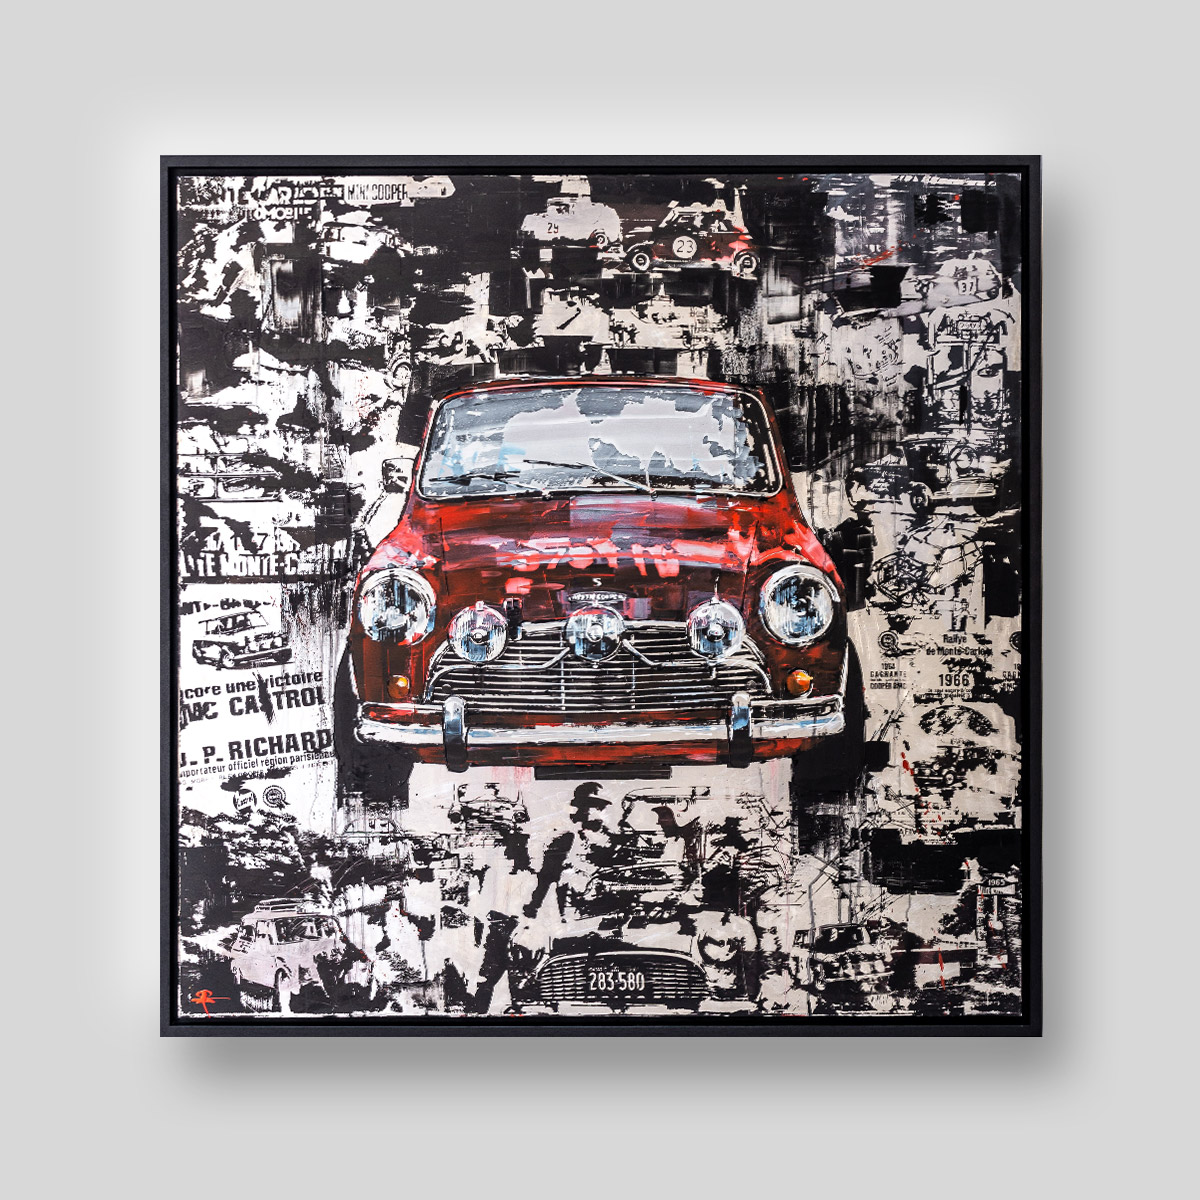 Mini Red by Paul Kenton, UK Contemporary artist, a painting from his Motorsports collection